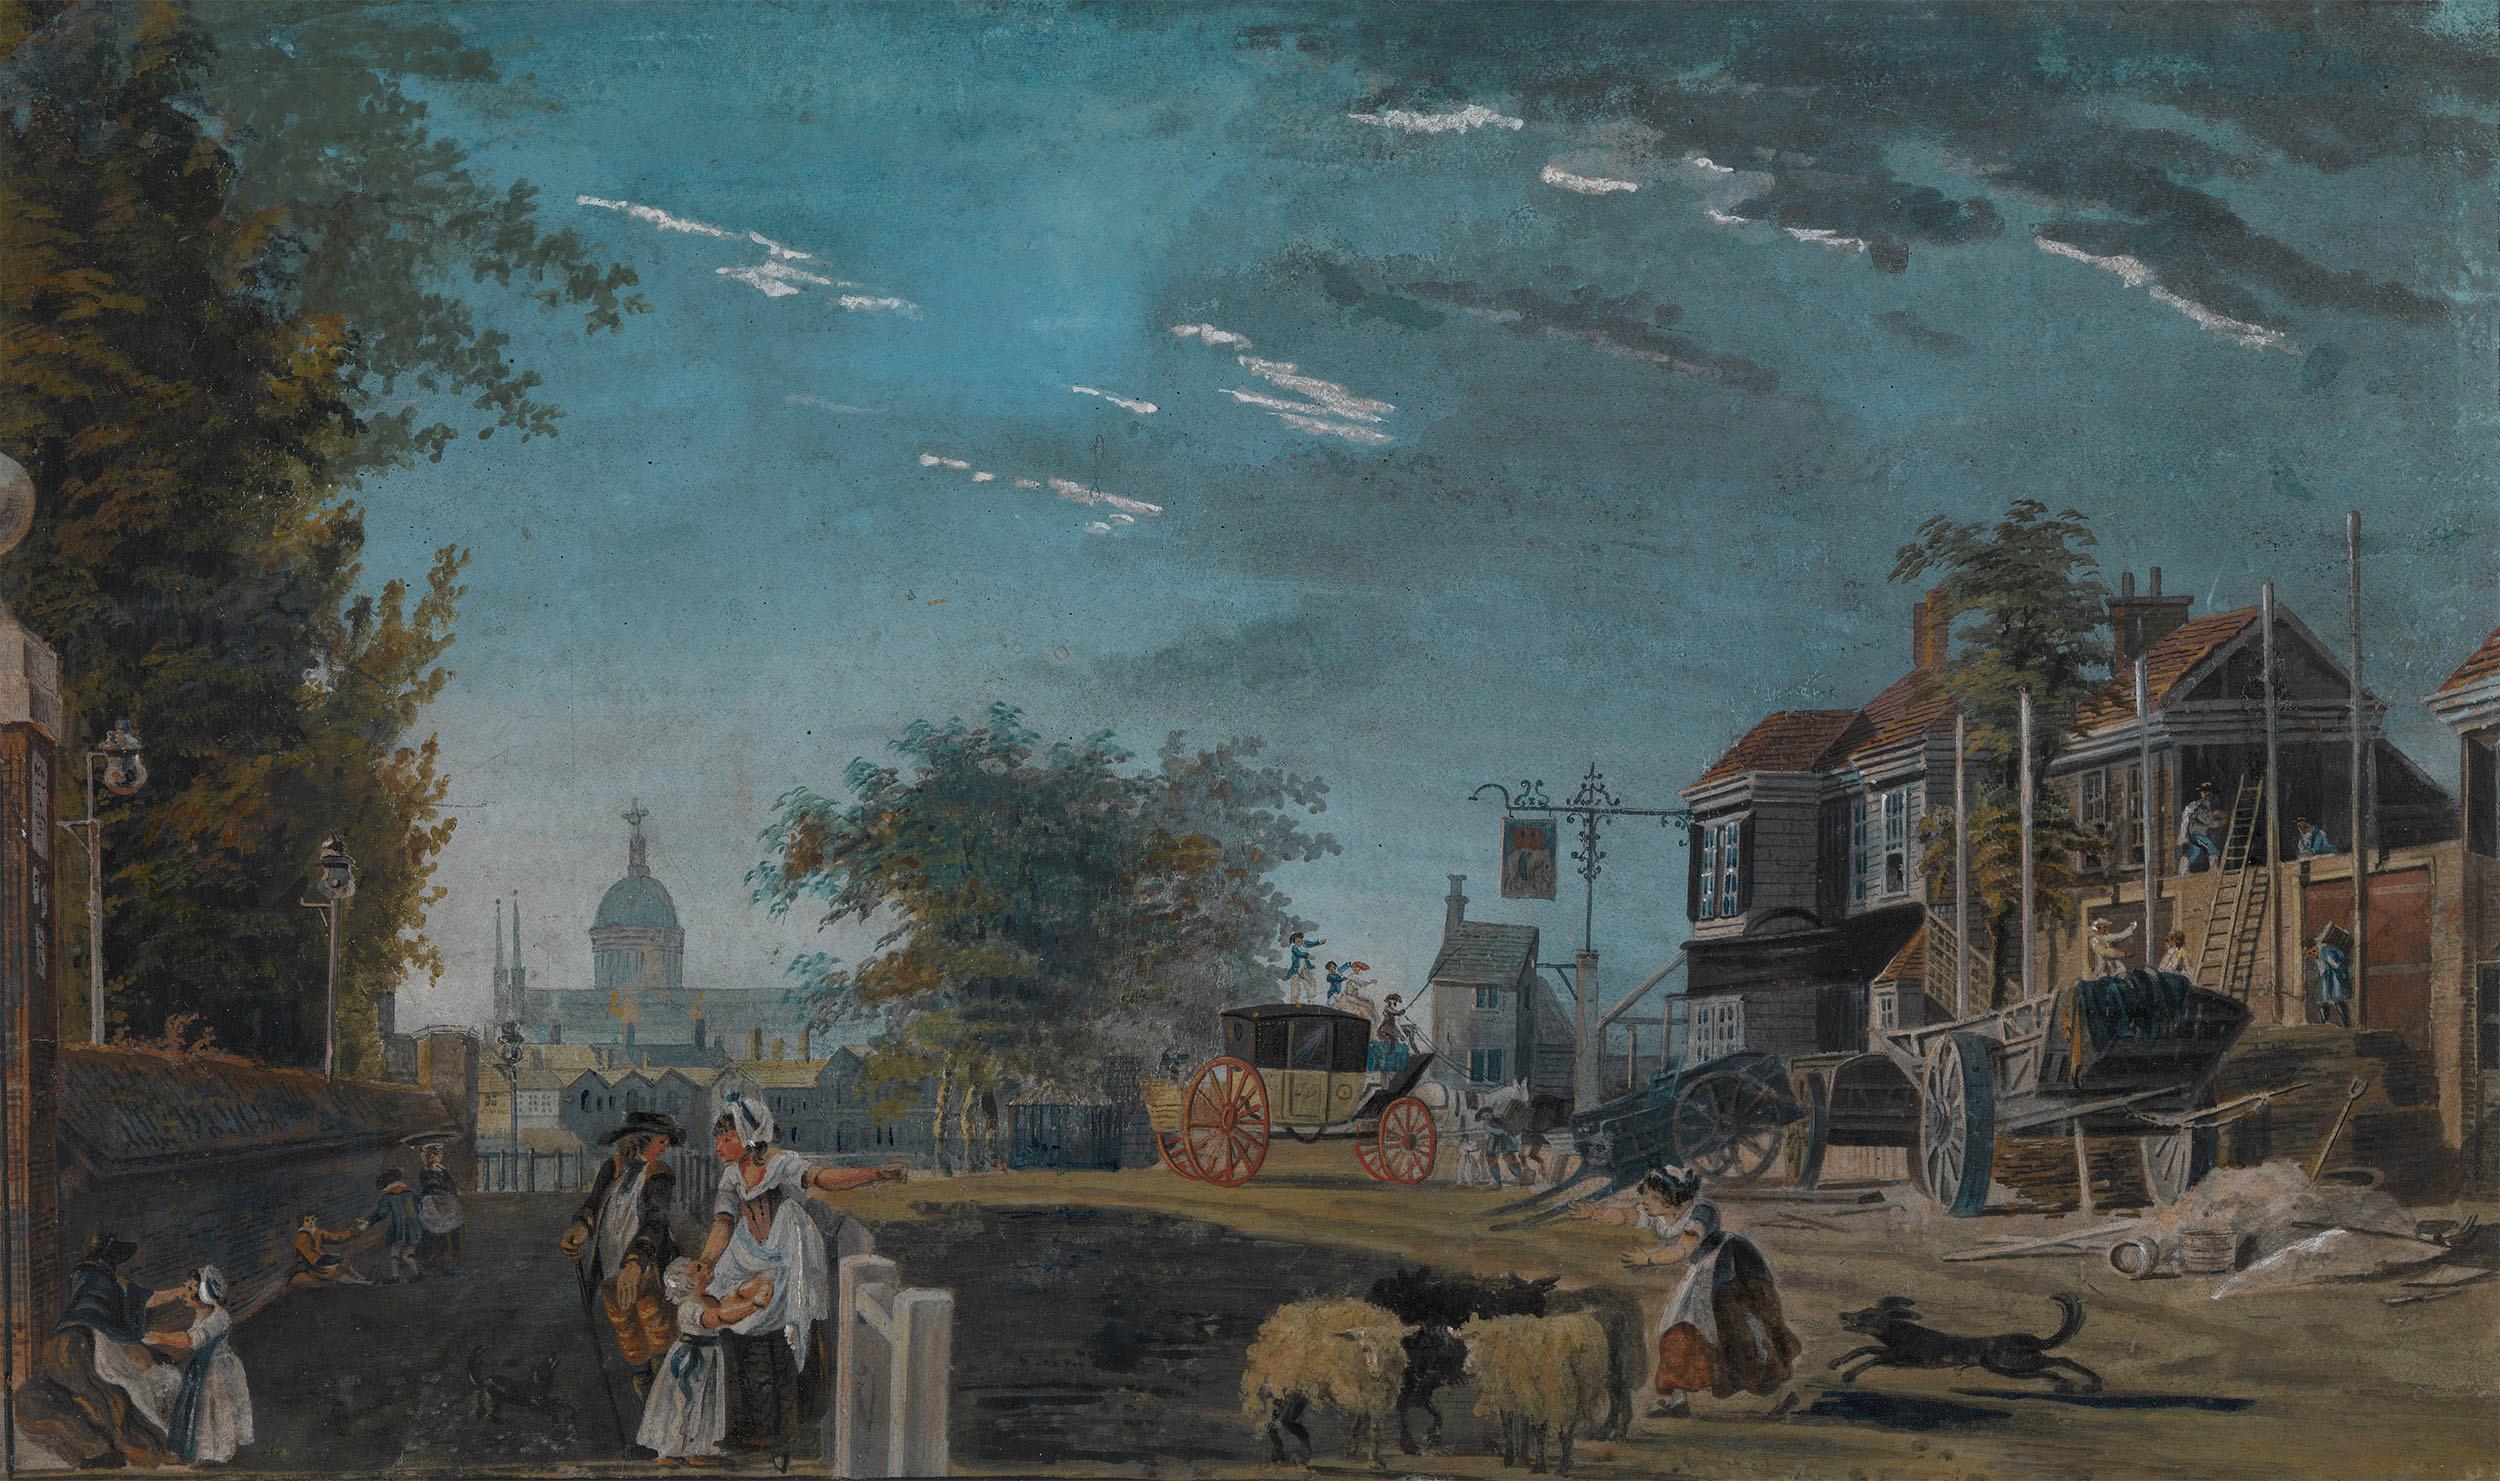 18th century view of the Elephant and Castle in London